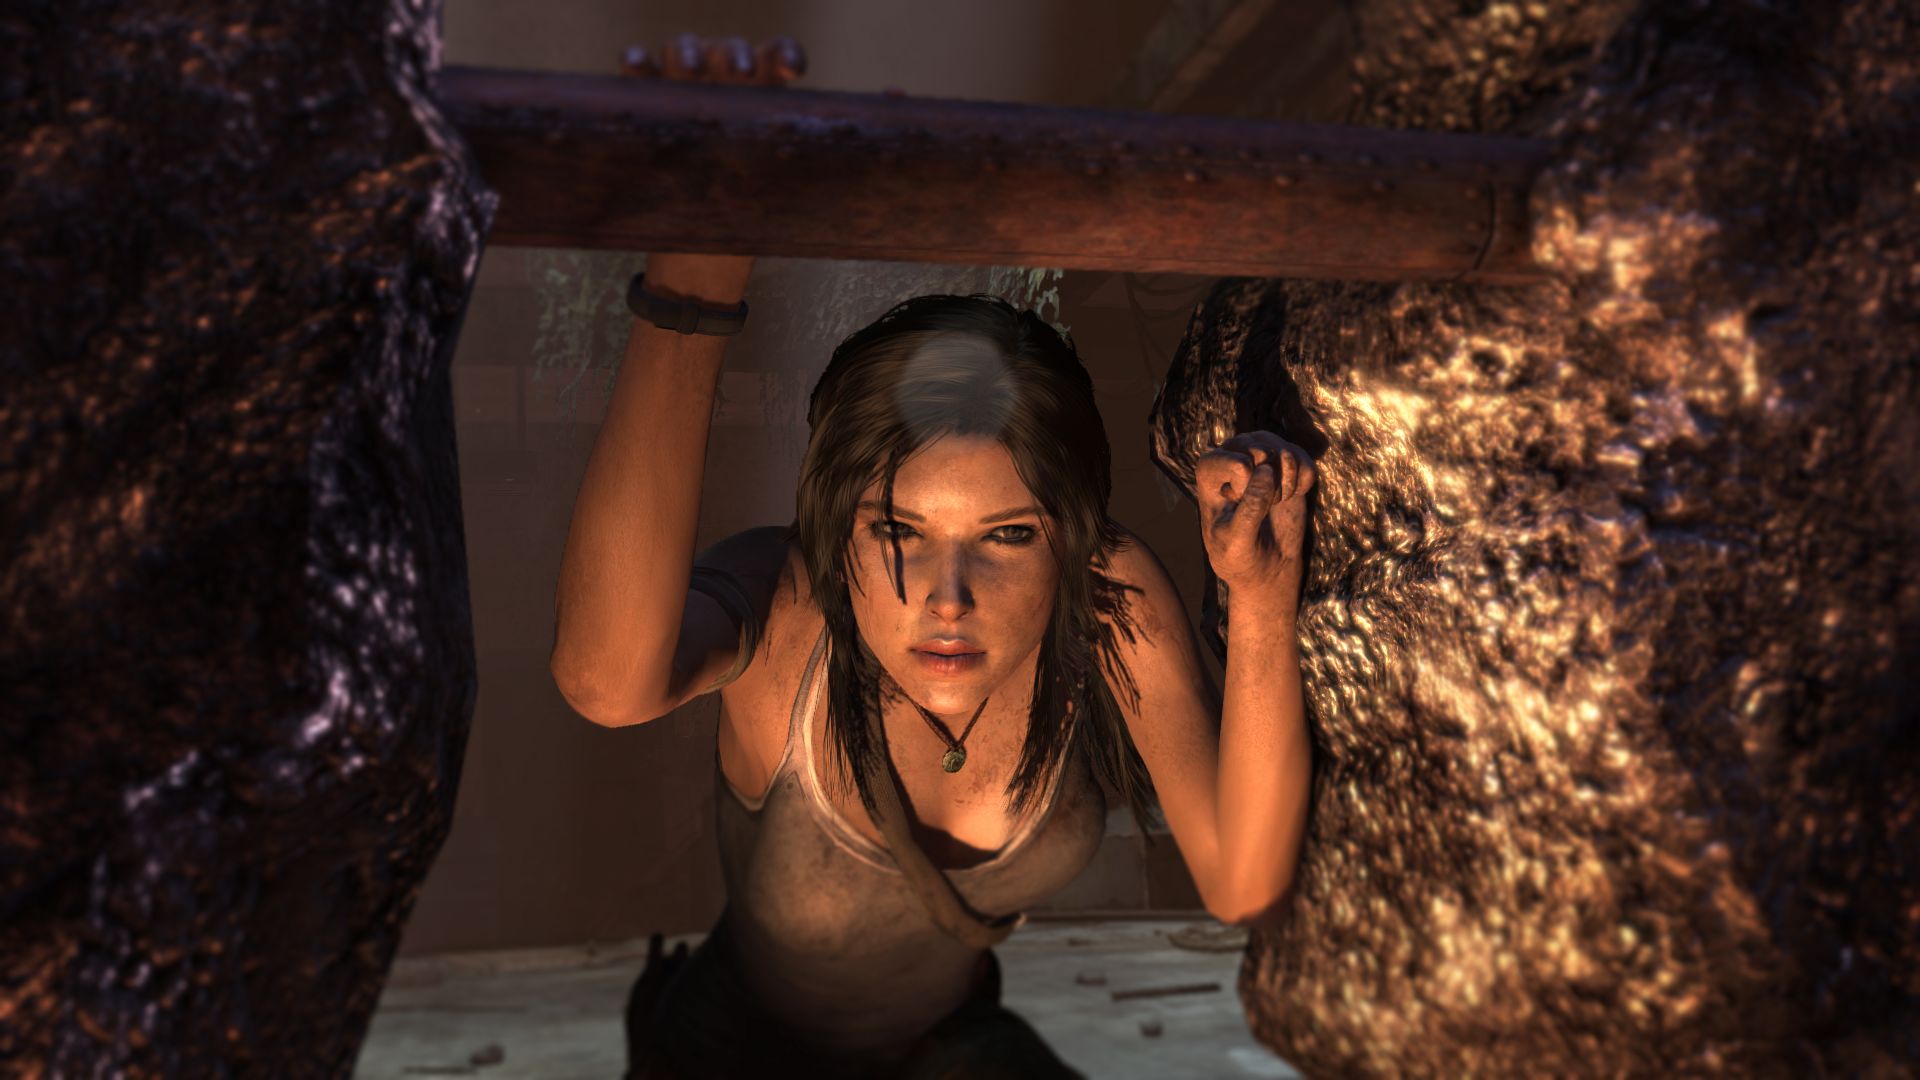 Download mobile wallpaper Tomb Raider, Video Game for free.